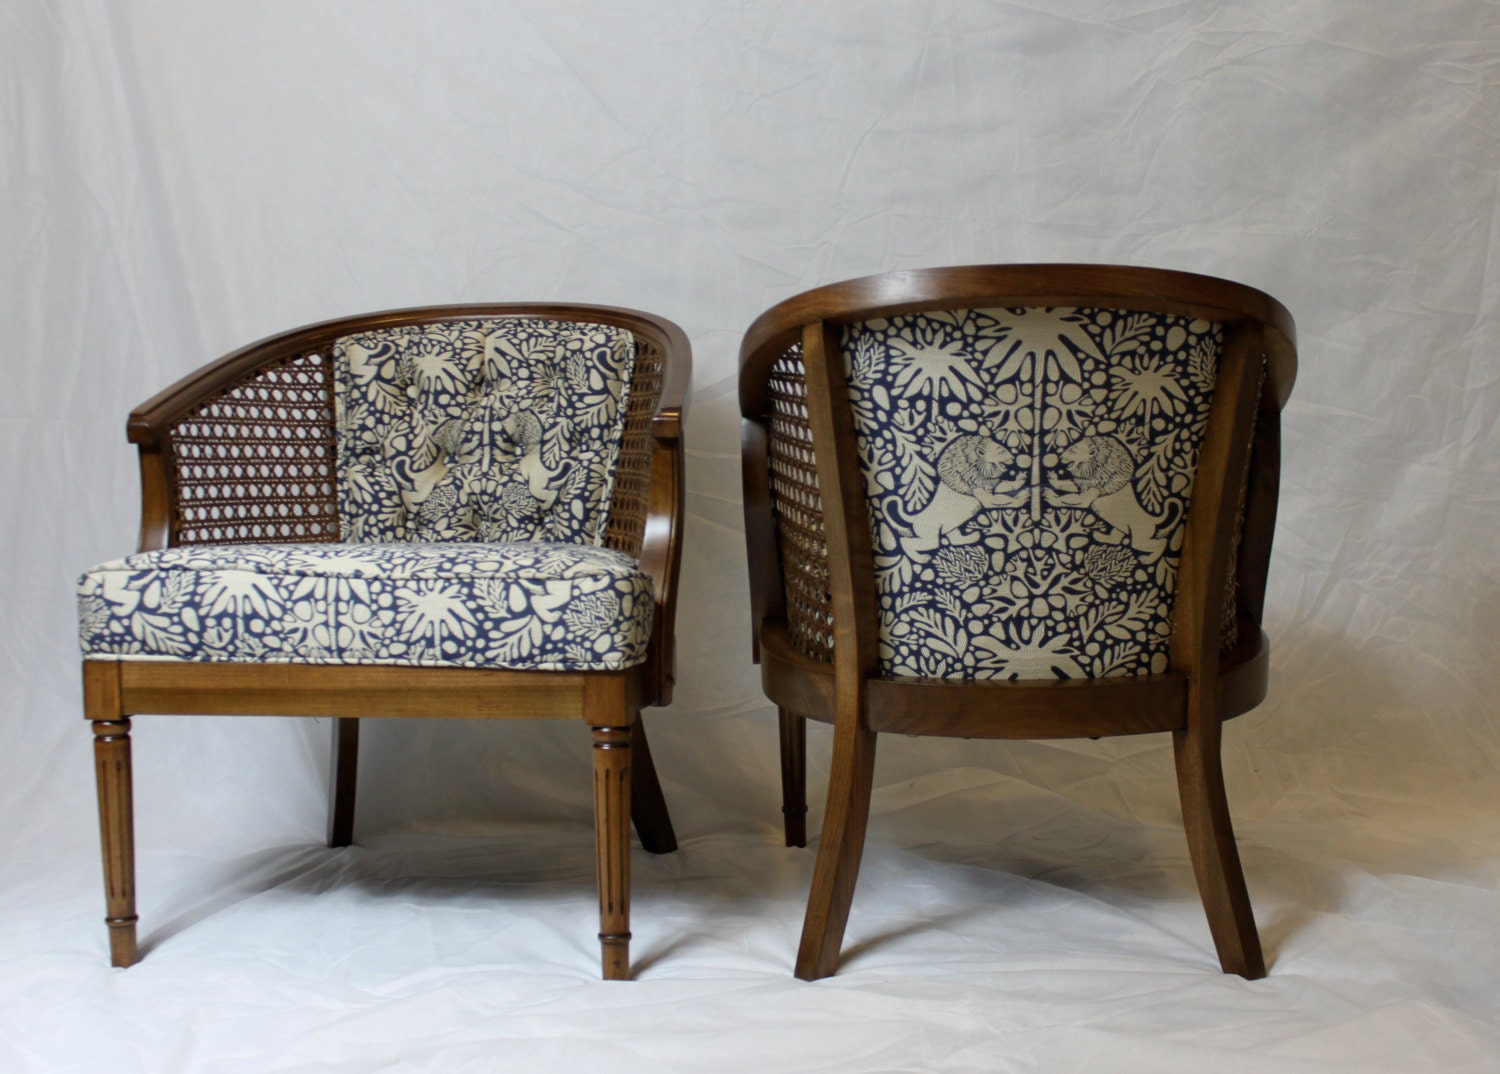 SOLD-Vintage Cane Barrel Chairs in navy and White